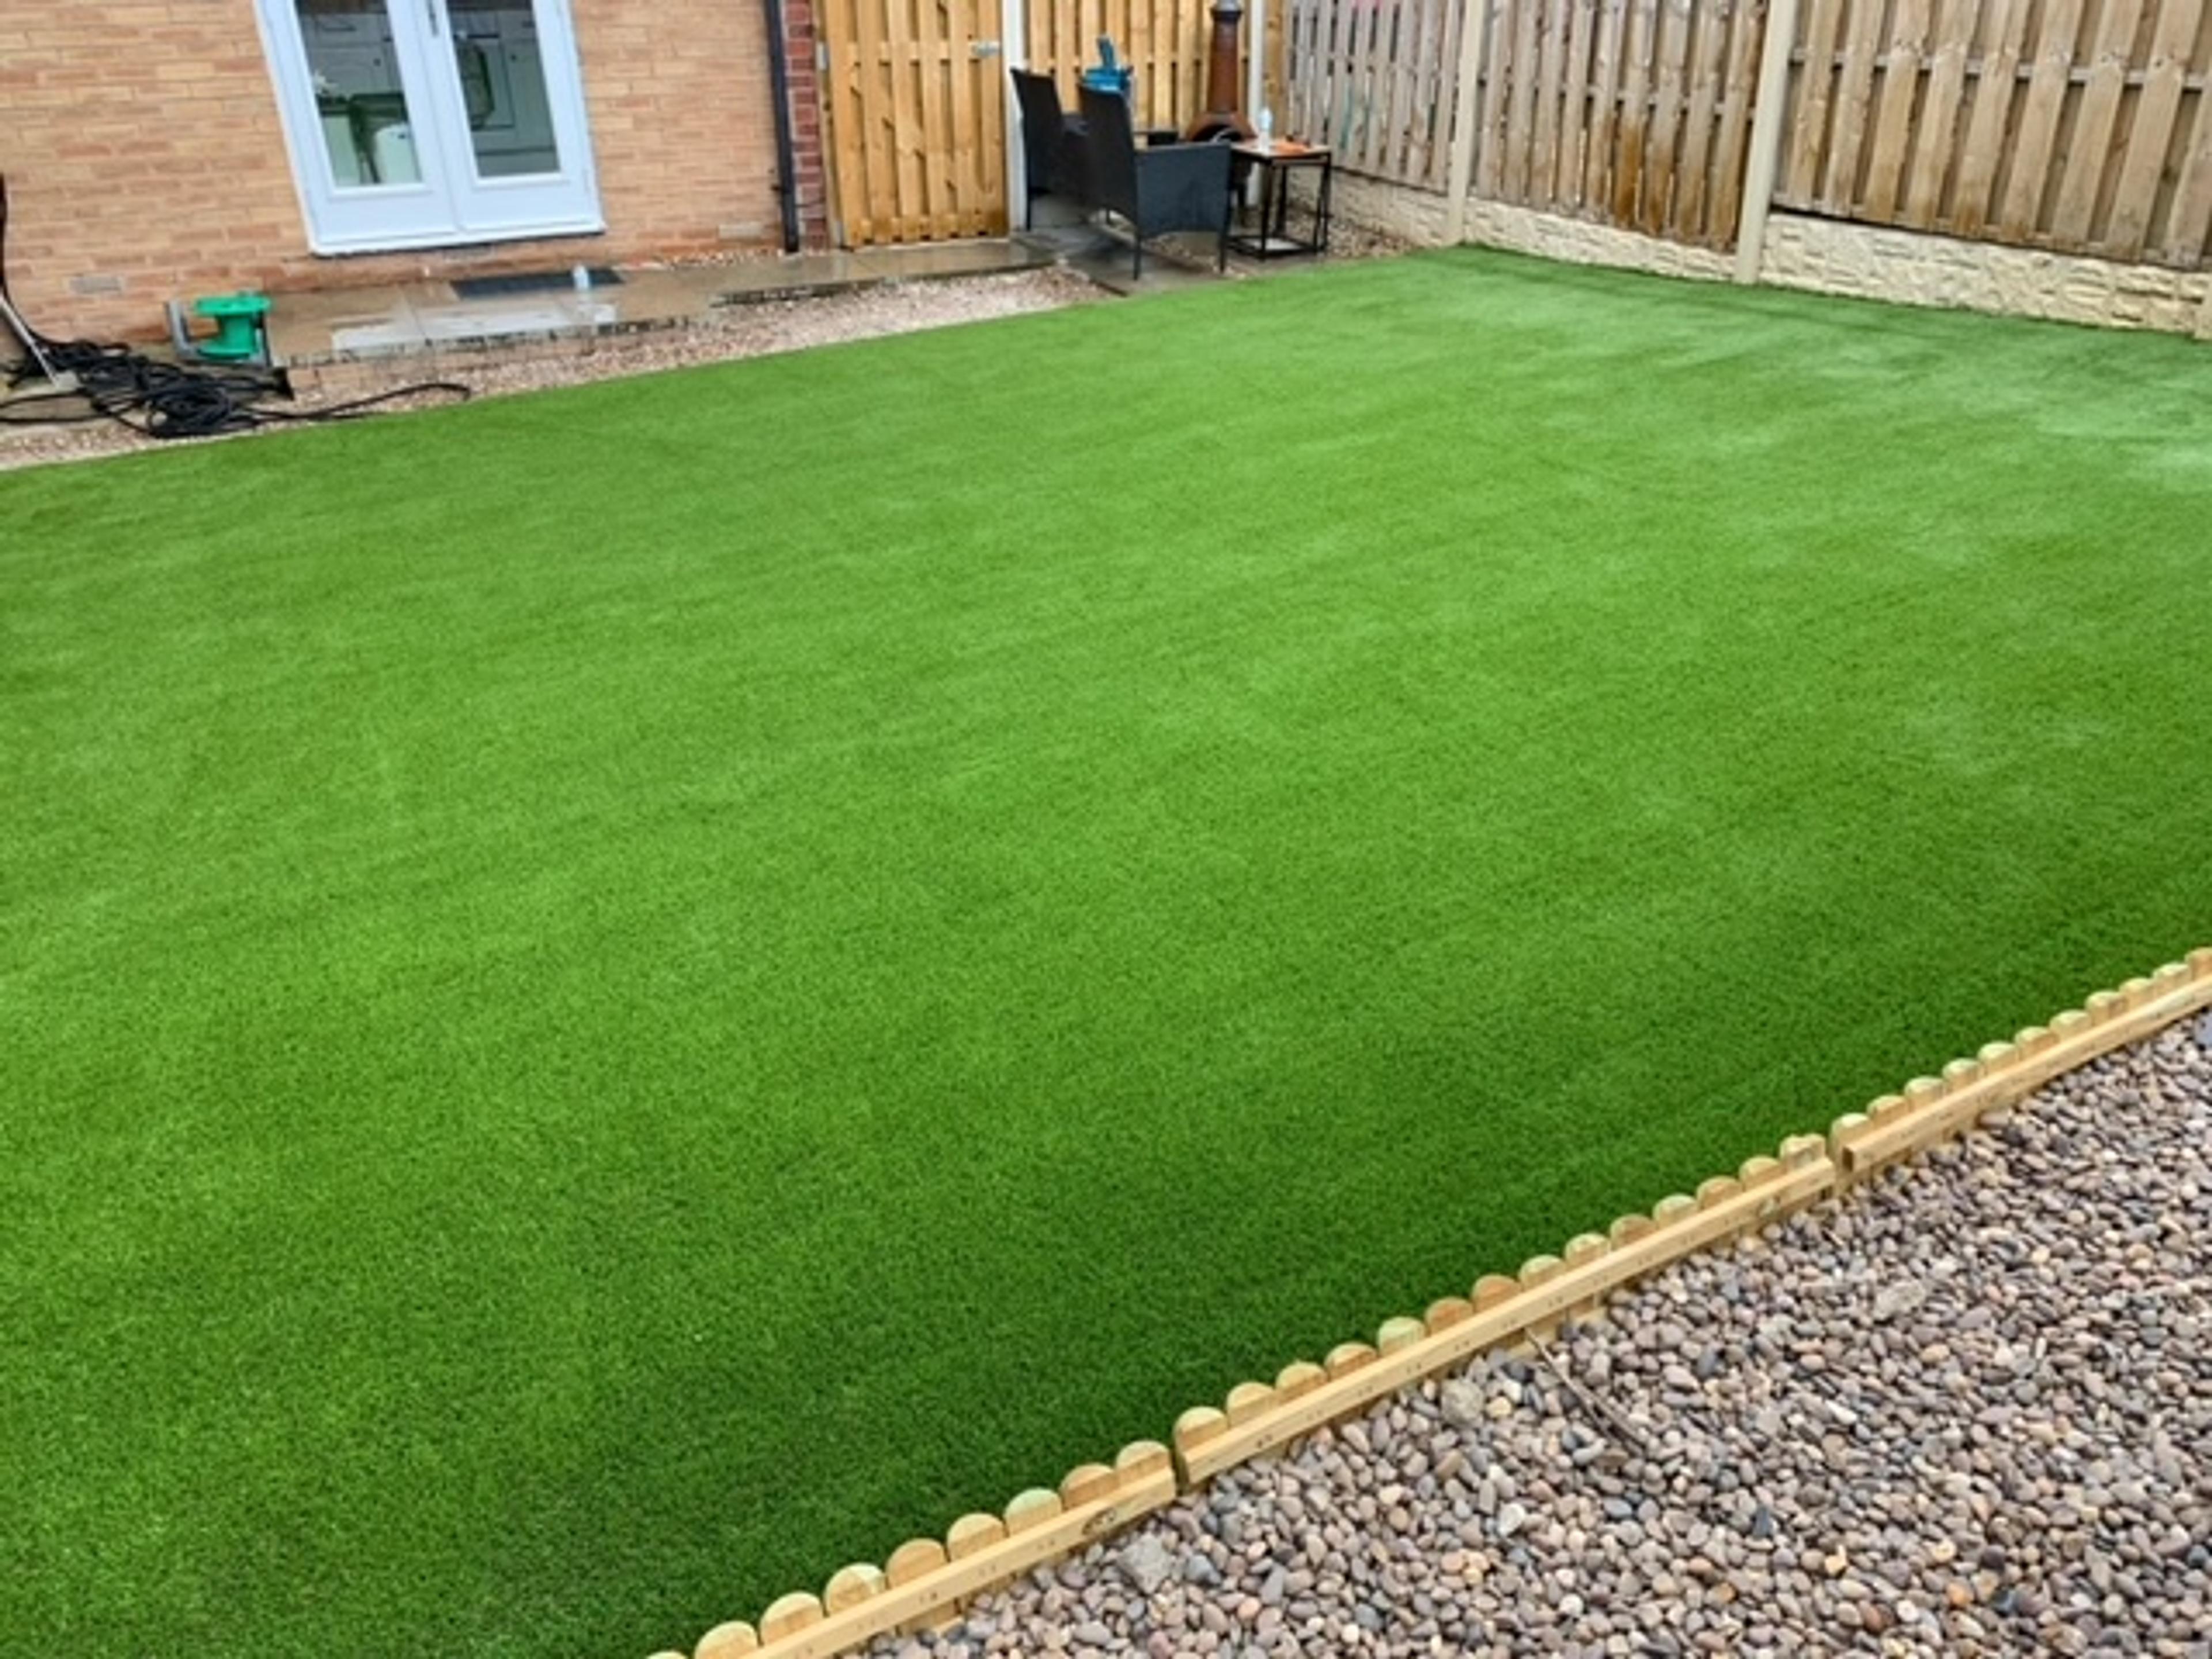 Artificial grass supply & fitting in Rotherham, South Yorkshire